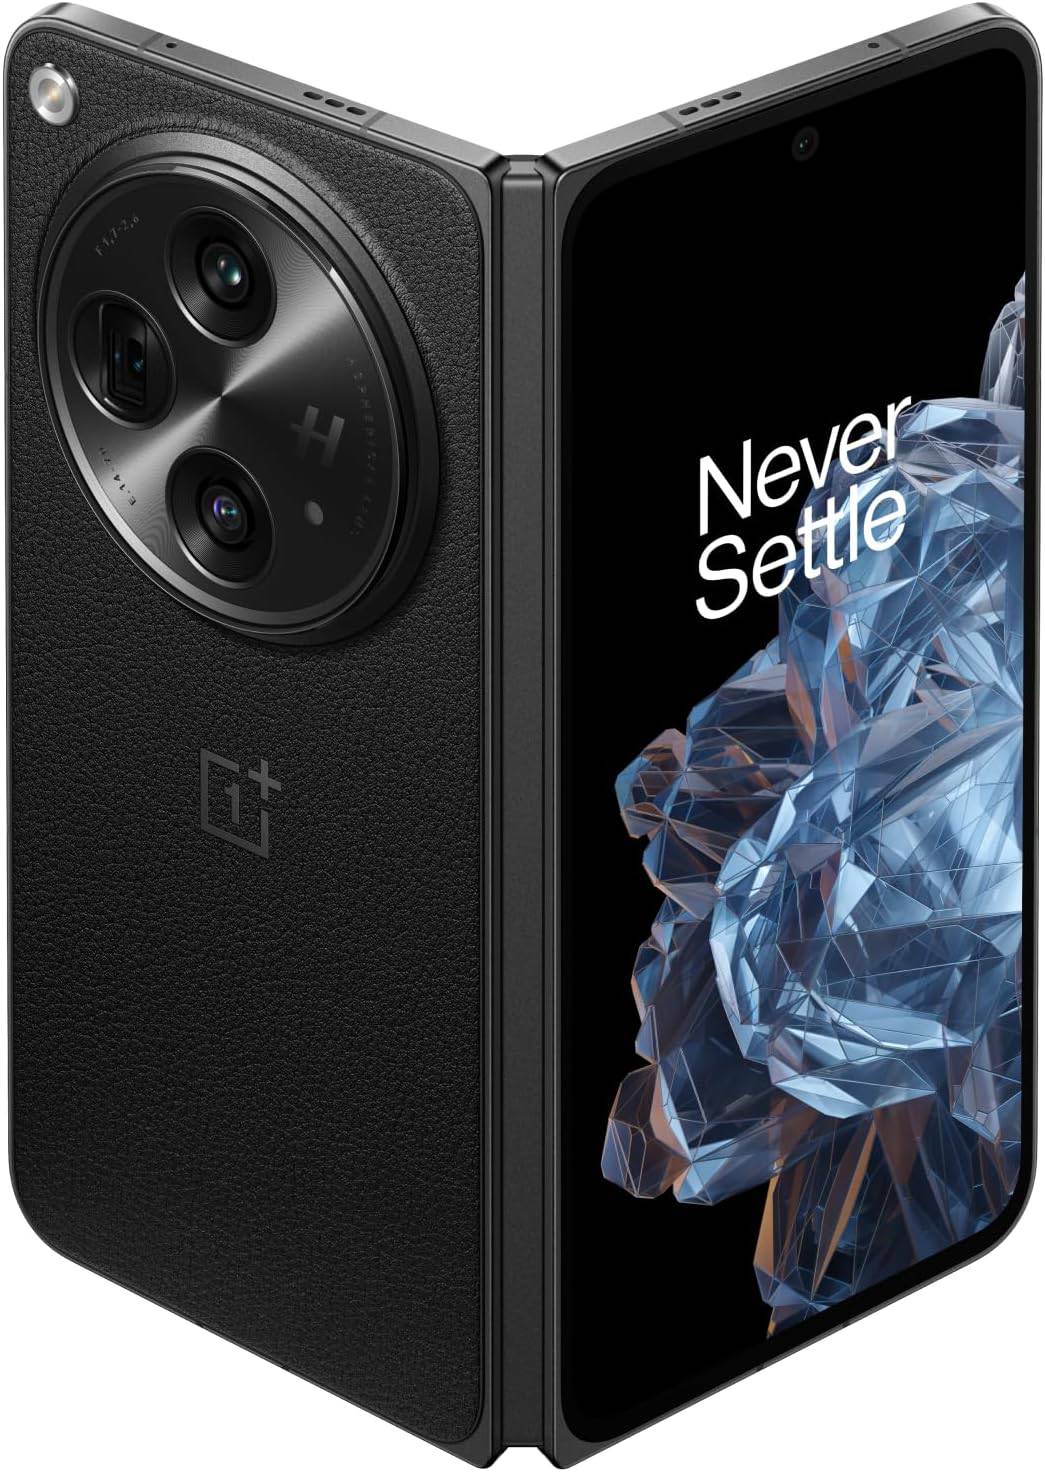 The OnePlus 6T, with its impressive 16GB RAM+512GB storage capacity, is shown with a camera on the back.